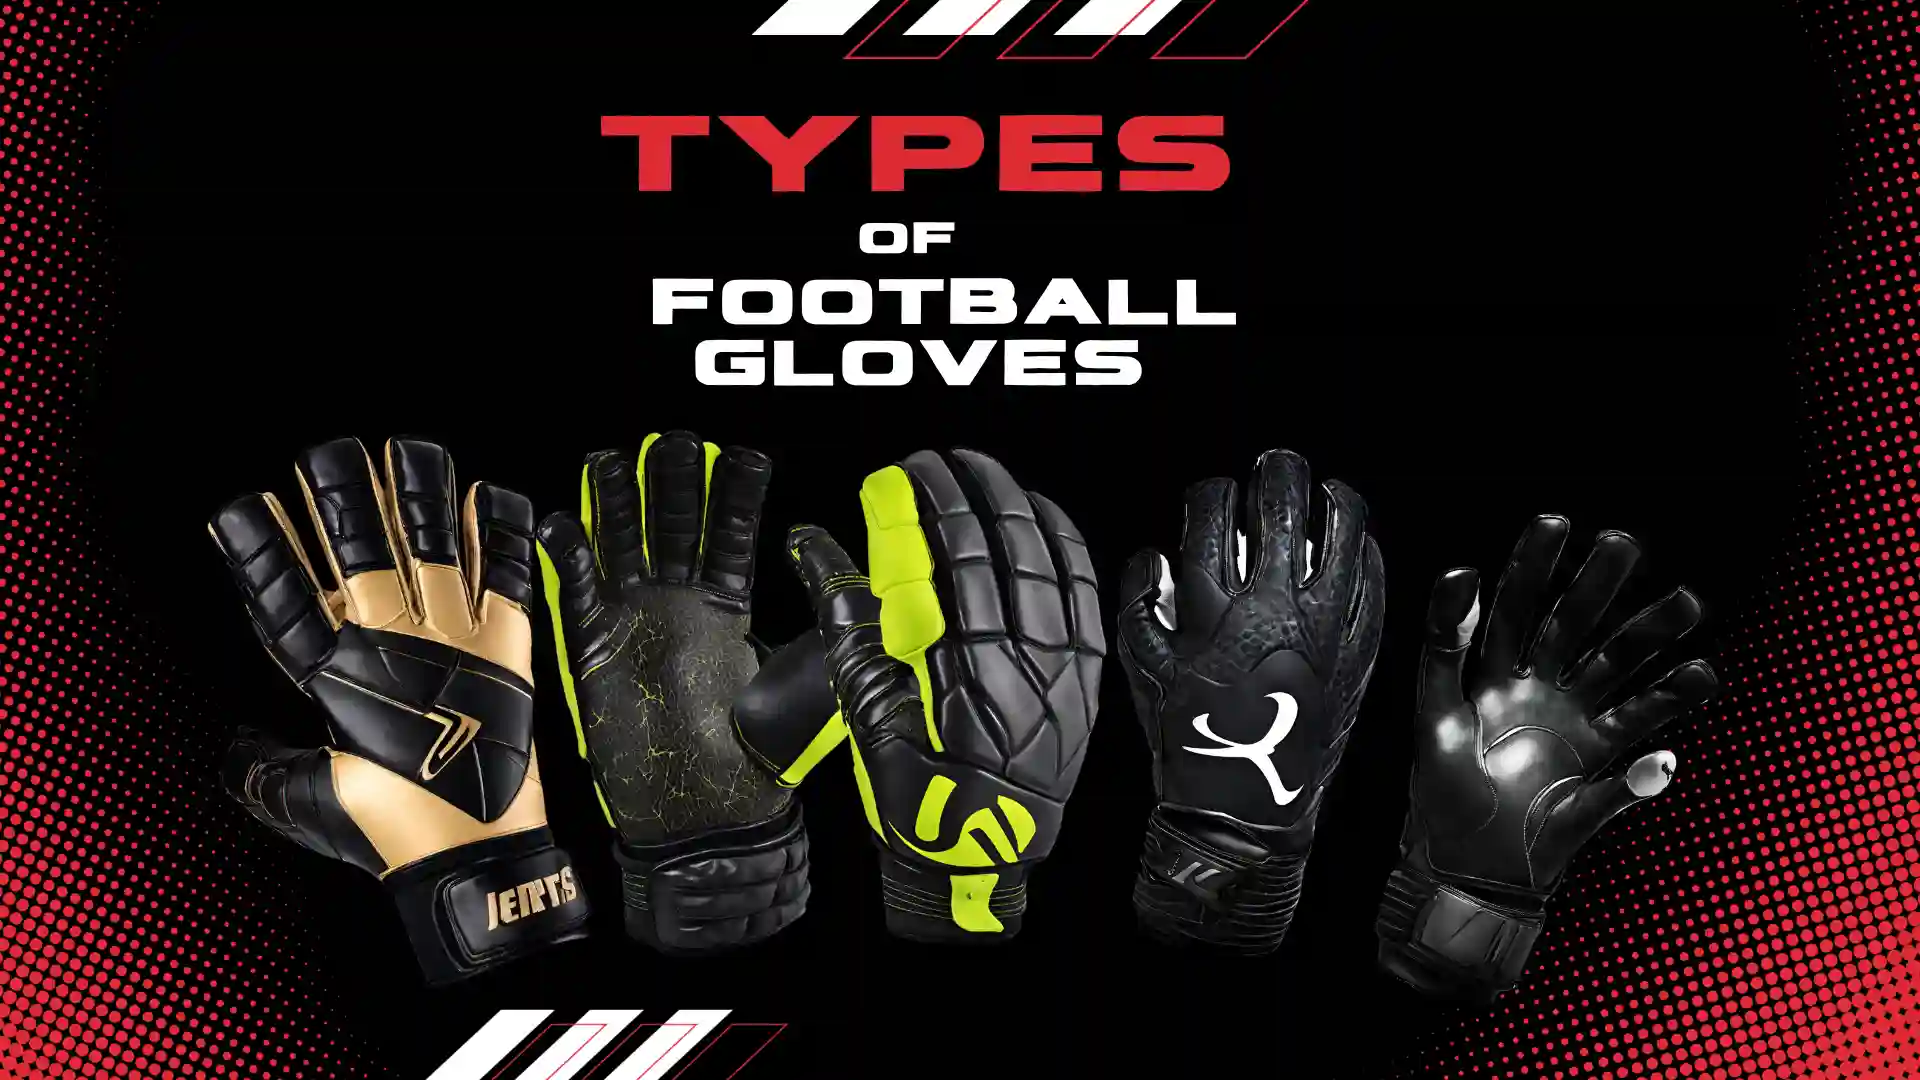 Types of football gloves